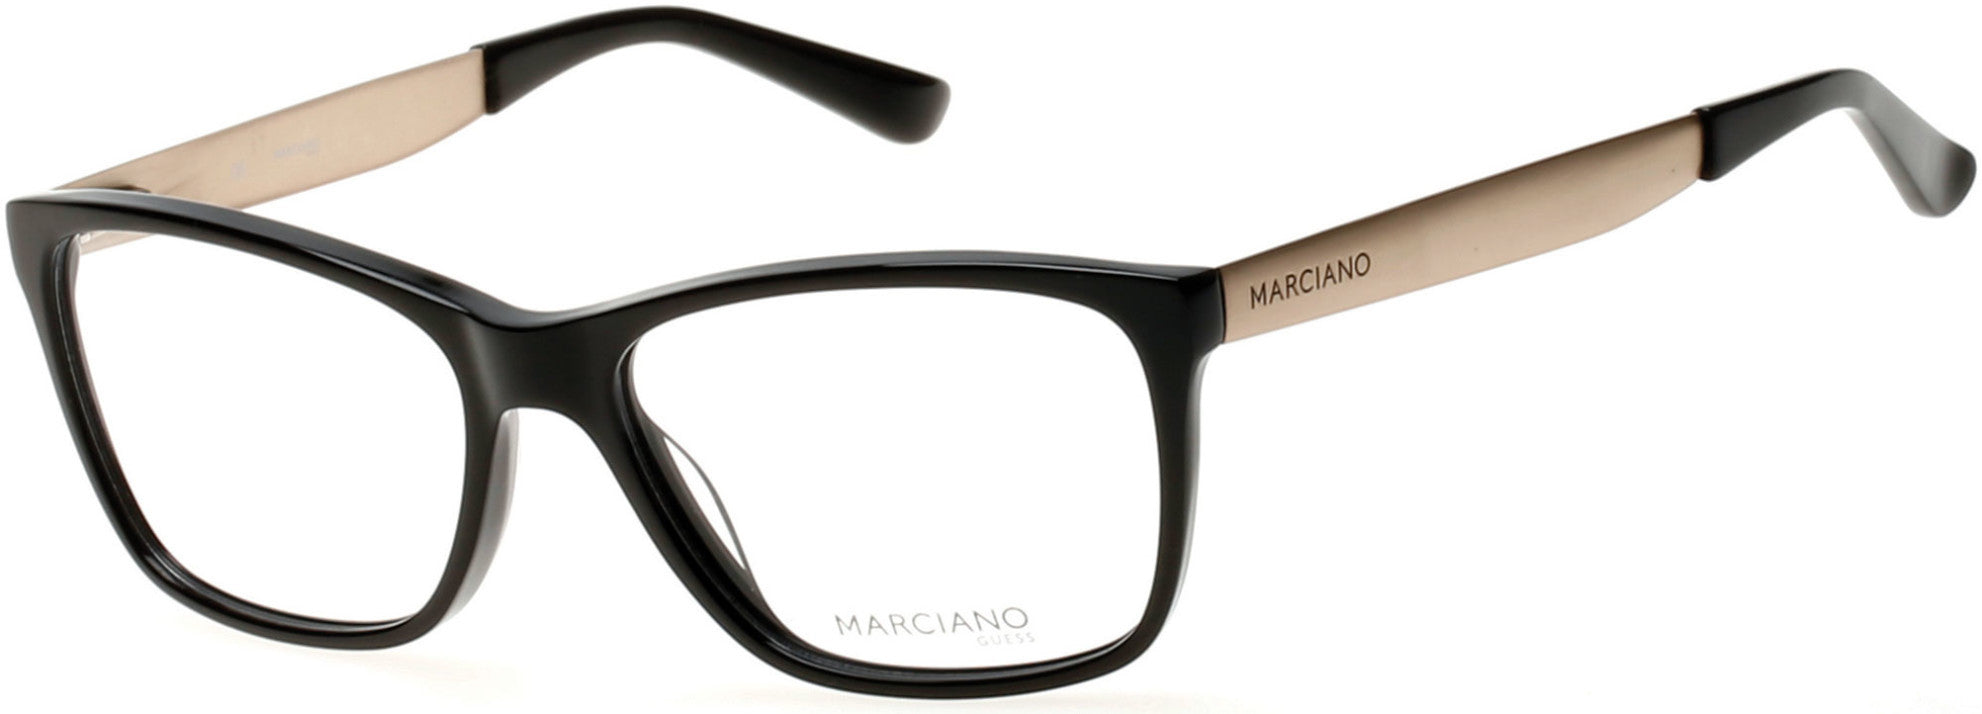 Guess By Marciano GM0256 Eyeglasses 001-001 - Shiny Black